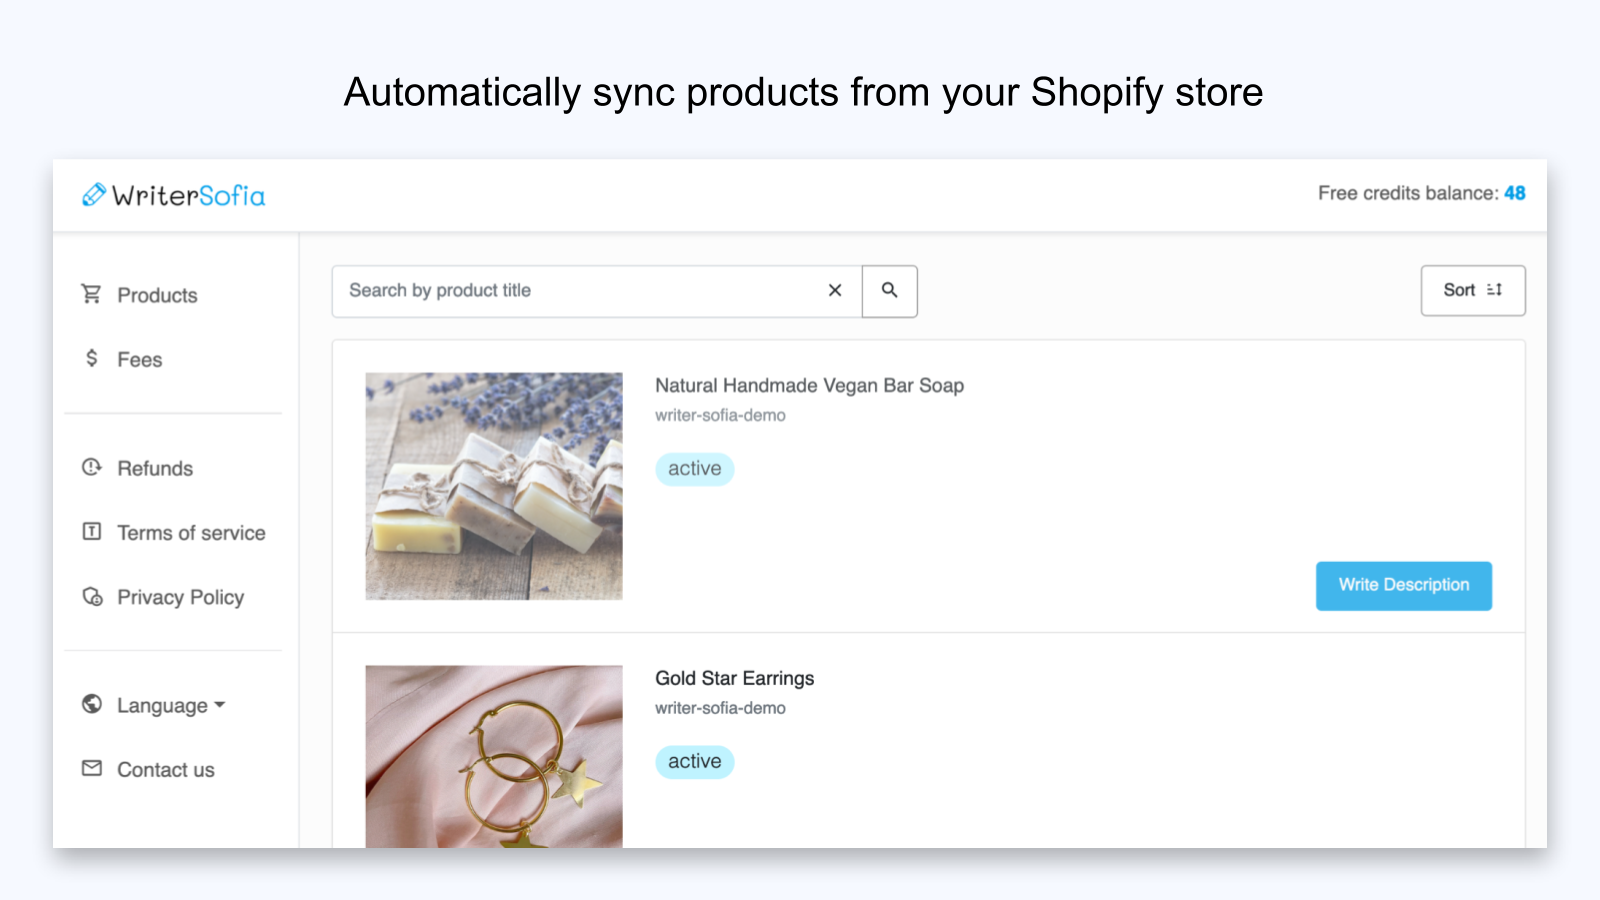 Automatically sync products from Shopify store